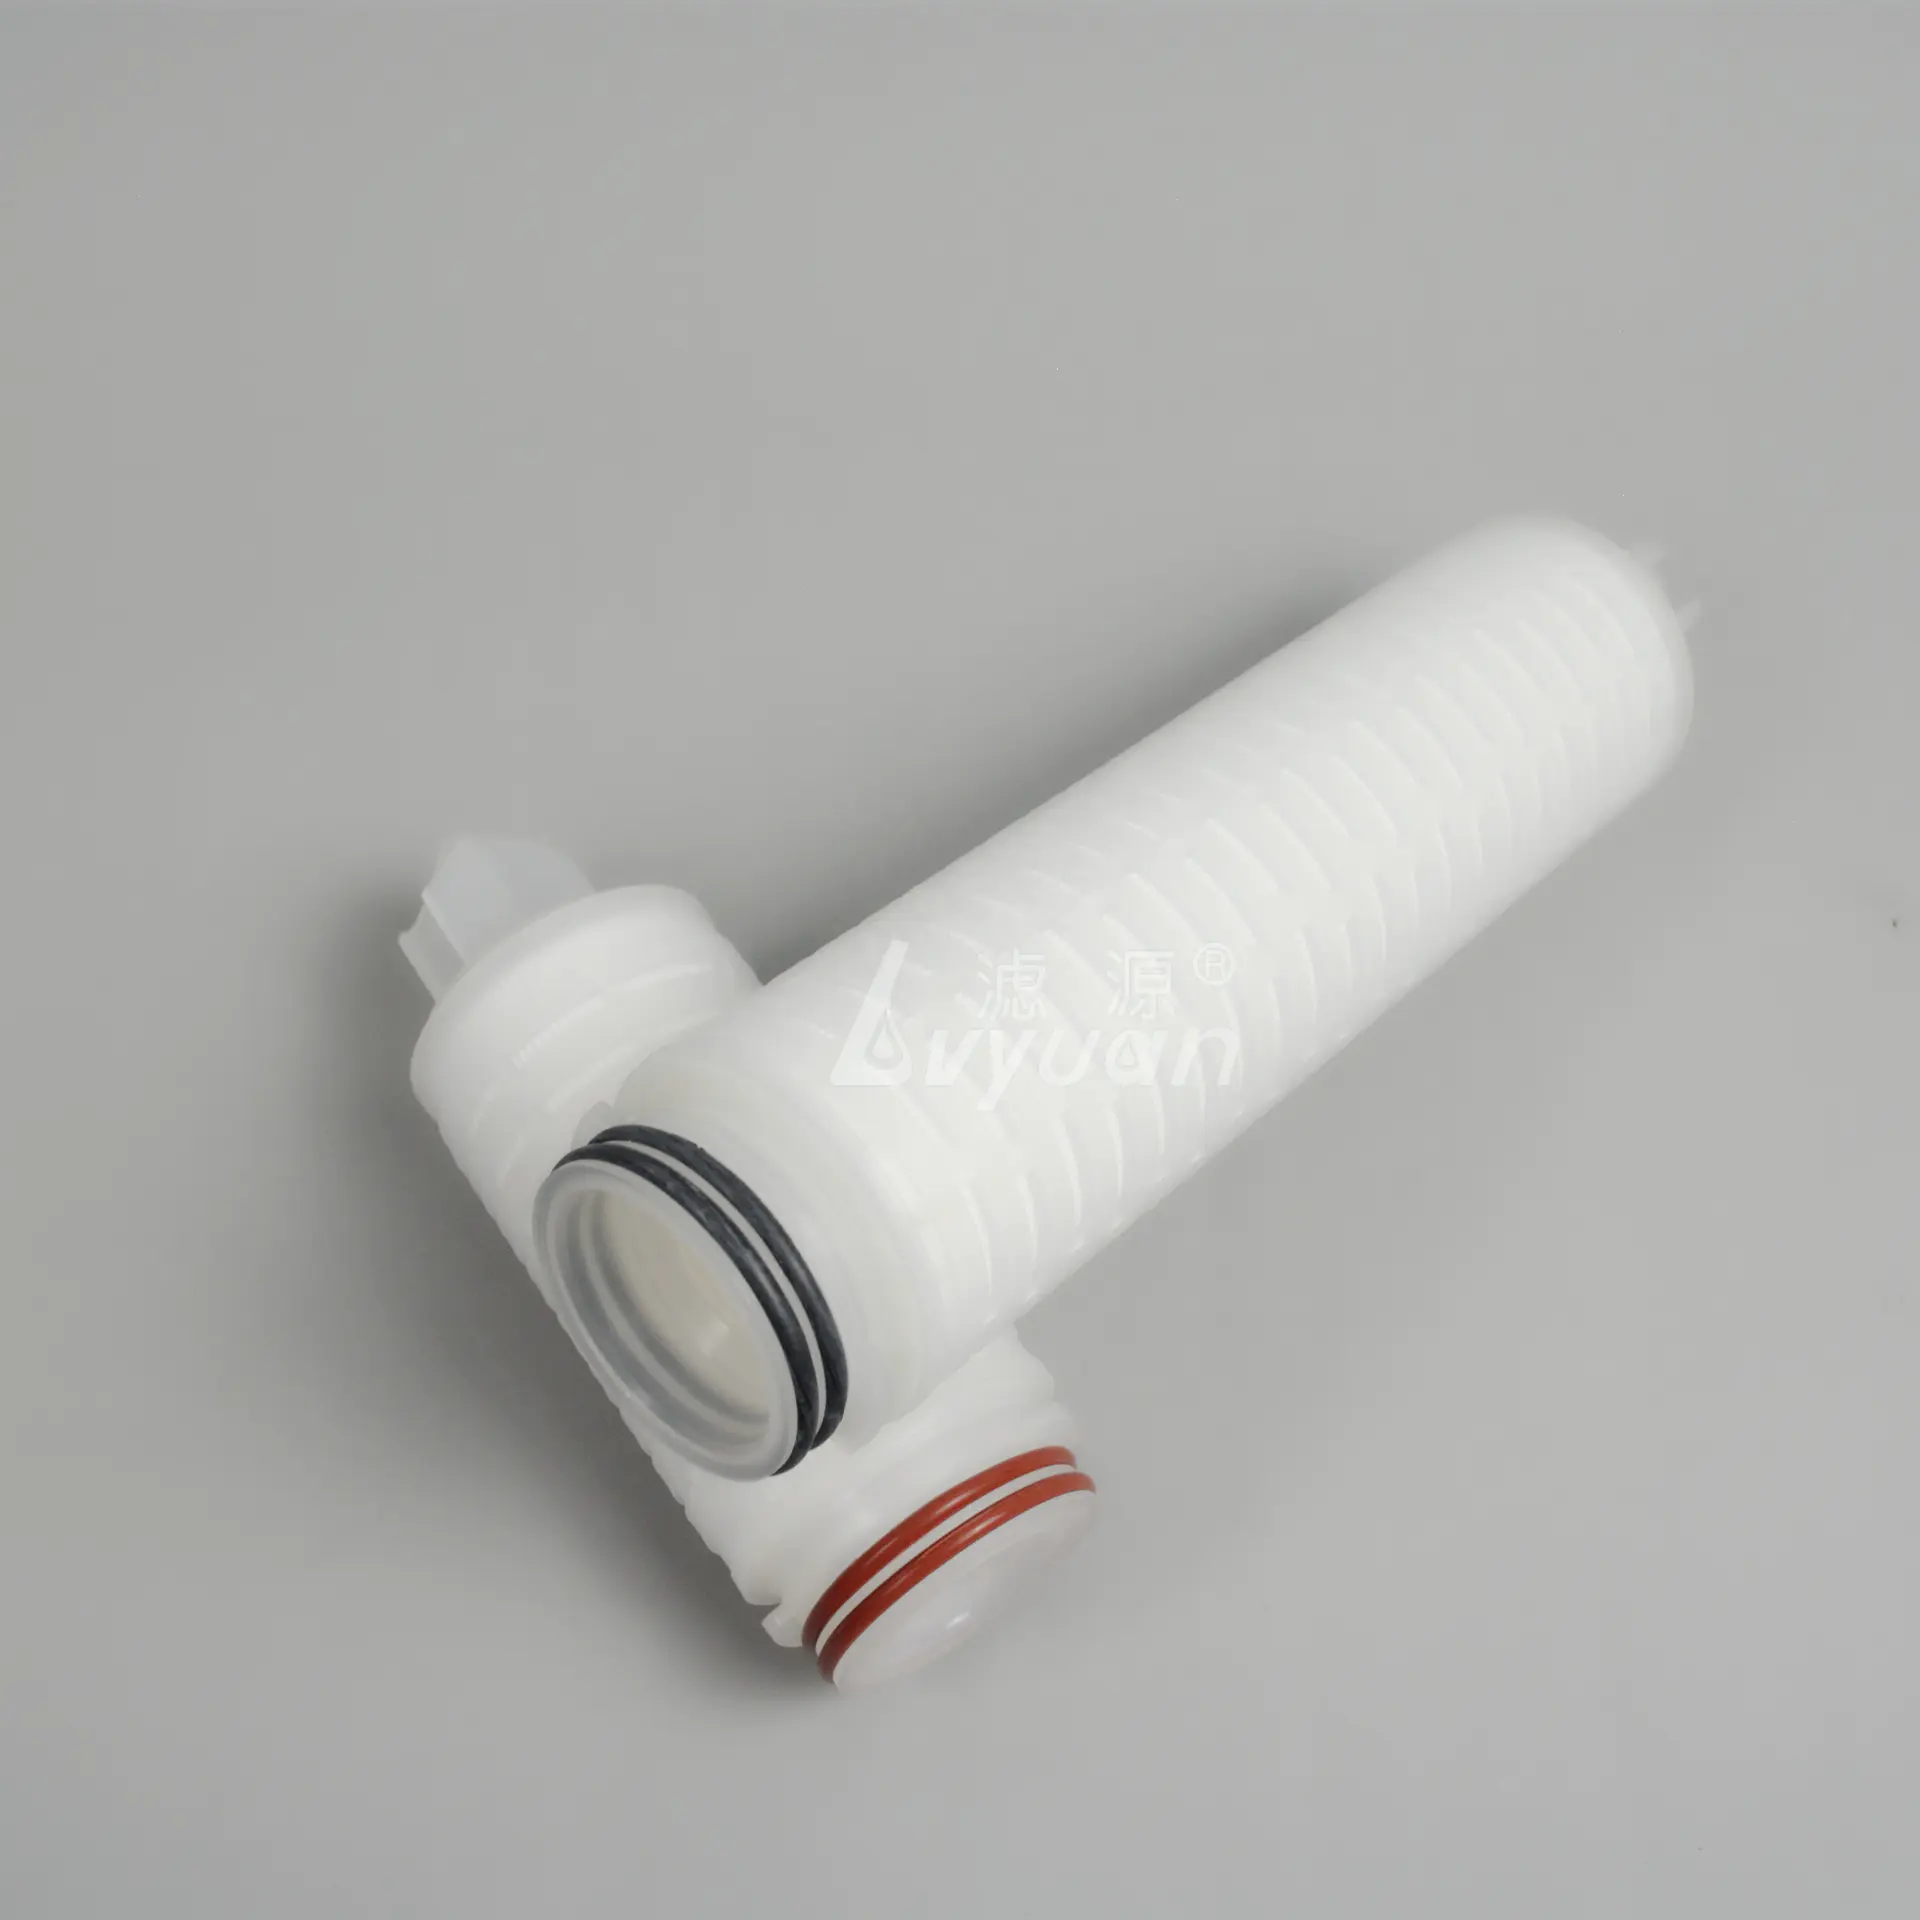 10 inch pleated filter 0.2 0.45 micron ptfe membrane cartridge filter with stainless steel filter core (222)